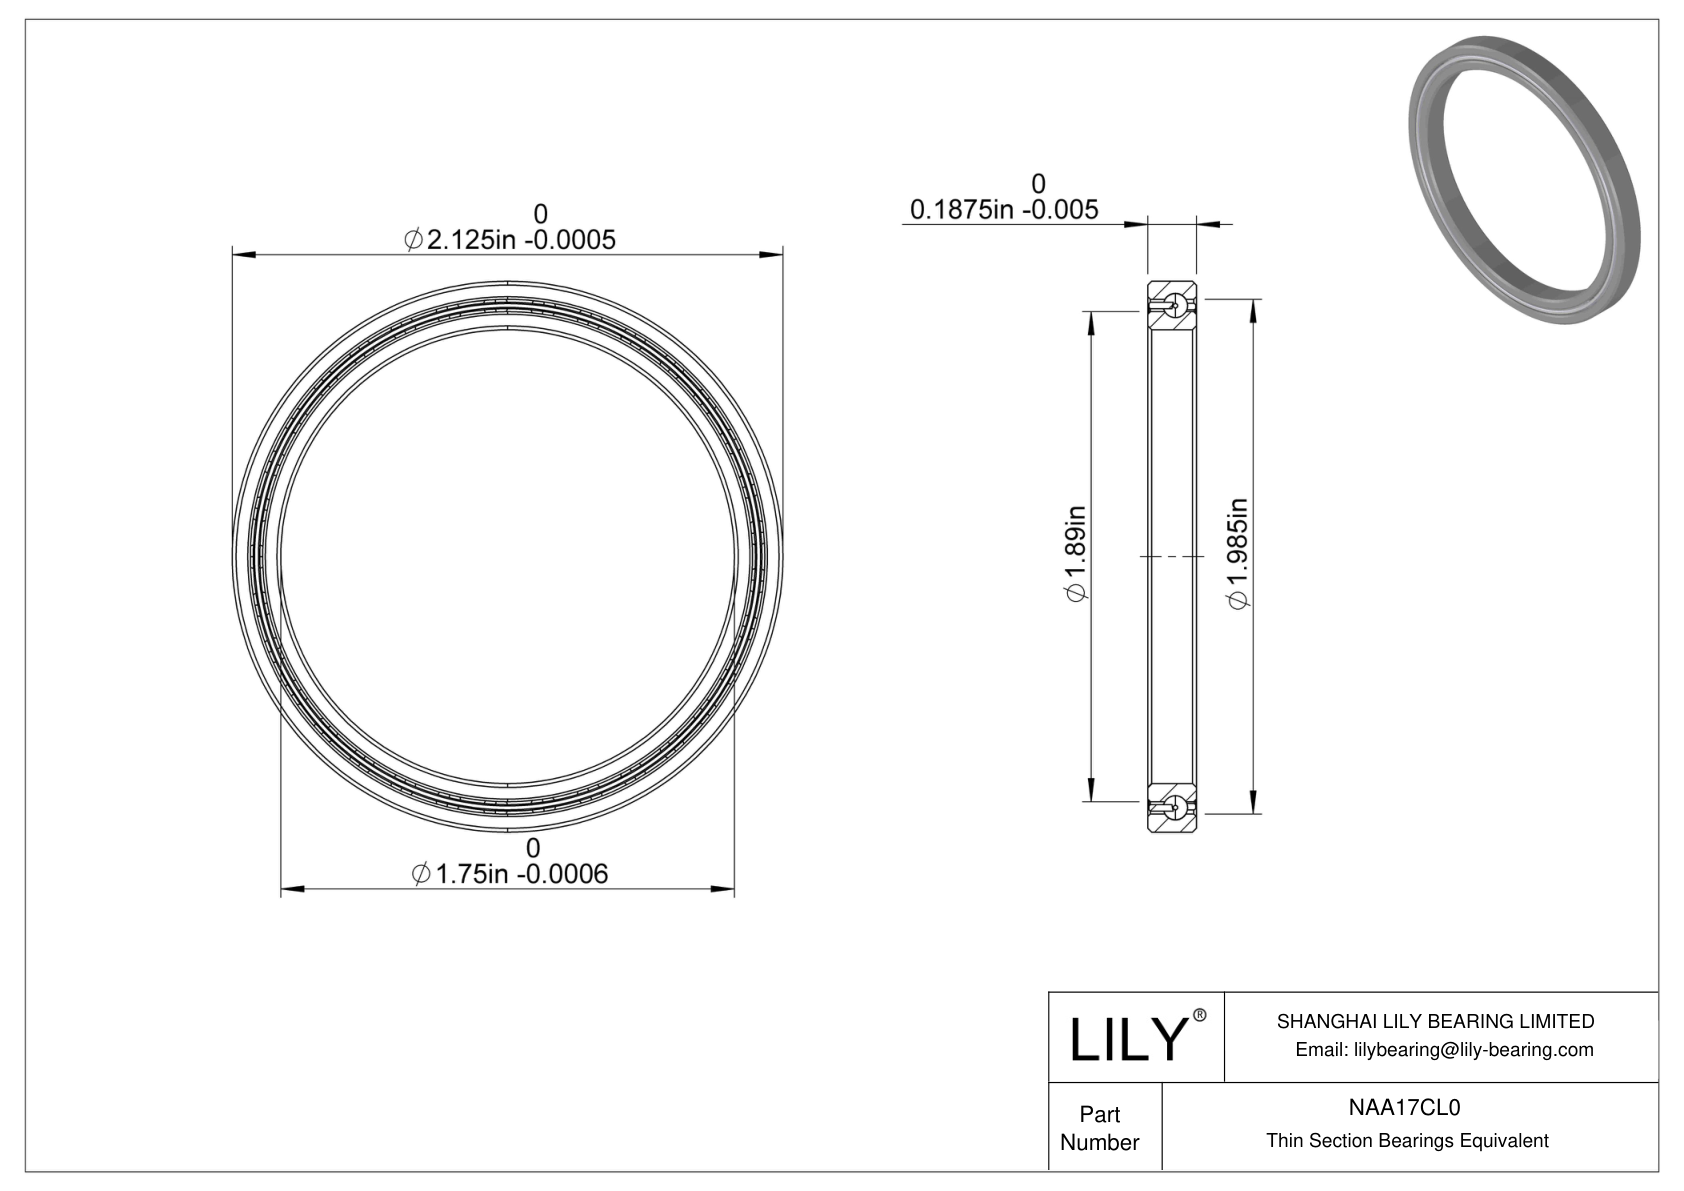 NAA17CL0 Constant Section (CS) Bearings cad drawing